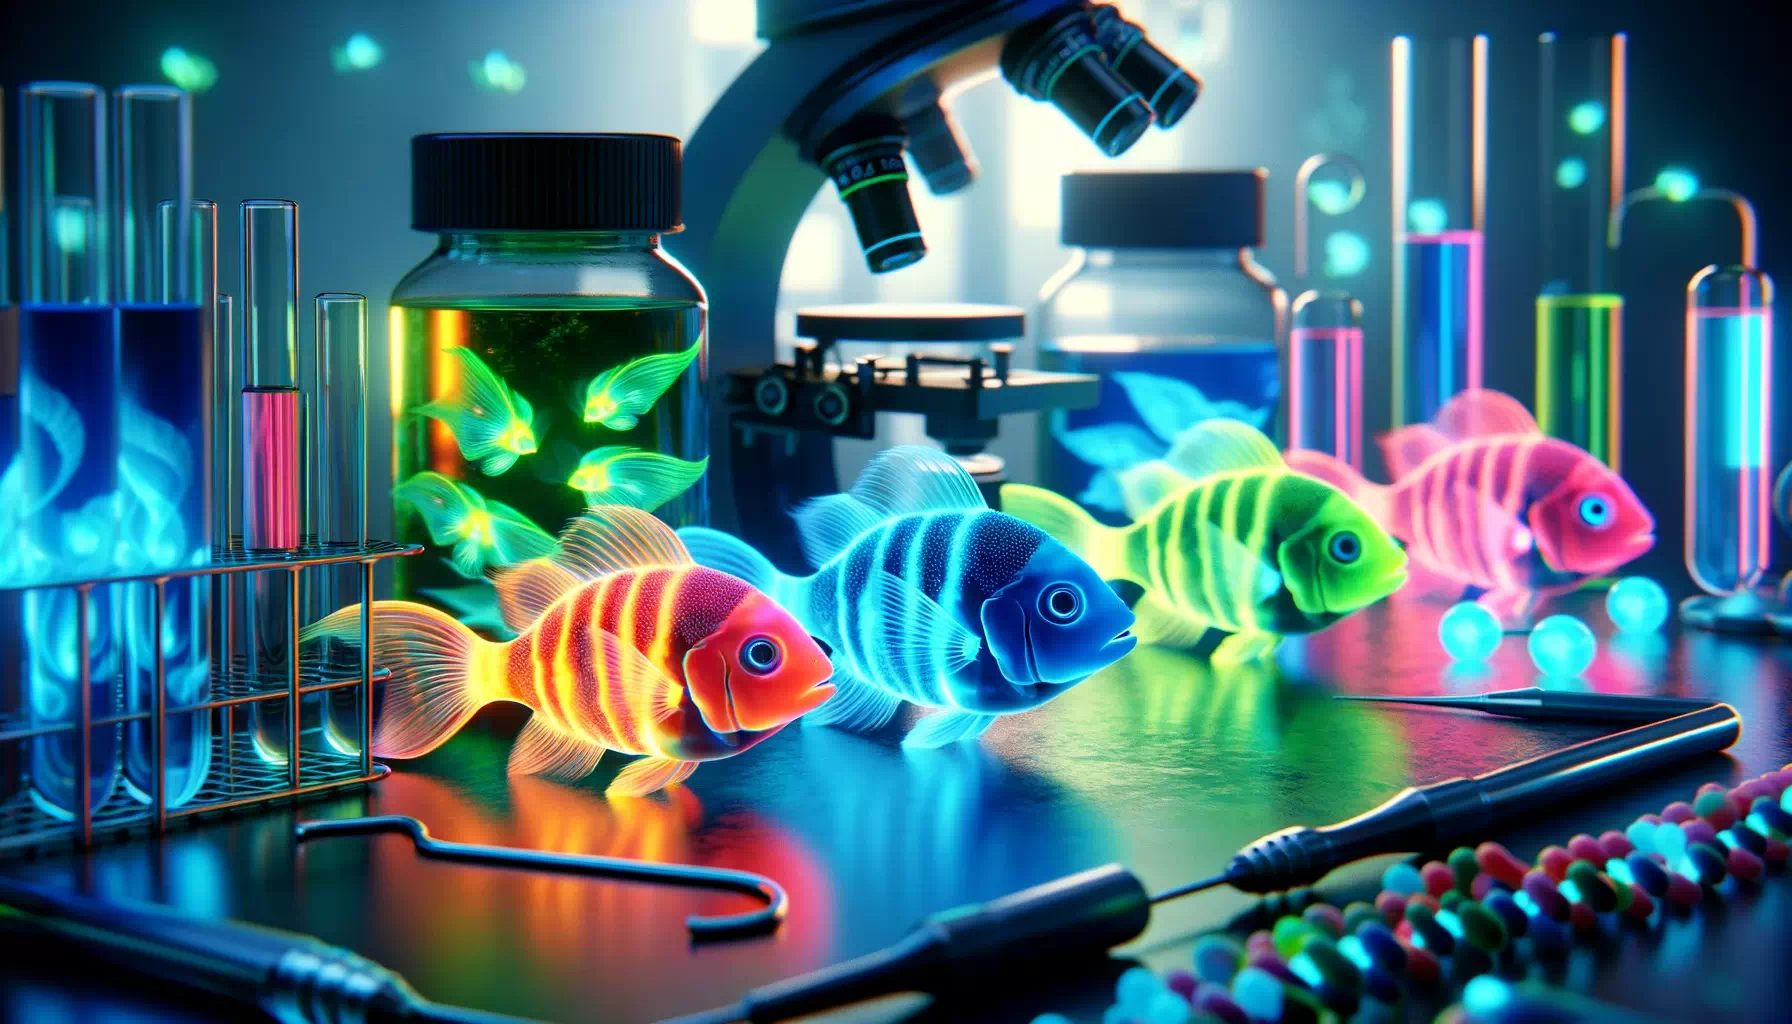 depicting GloFish with vibrant, fluorescent colors, highlighting their genetic modifications, in a laboratory set